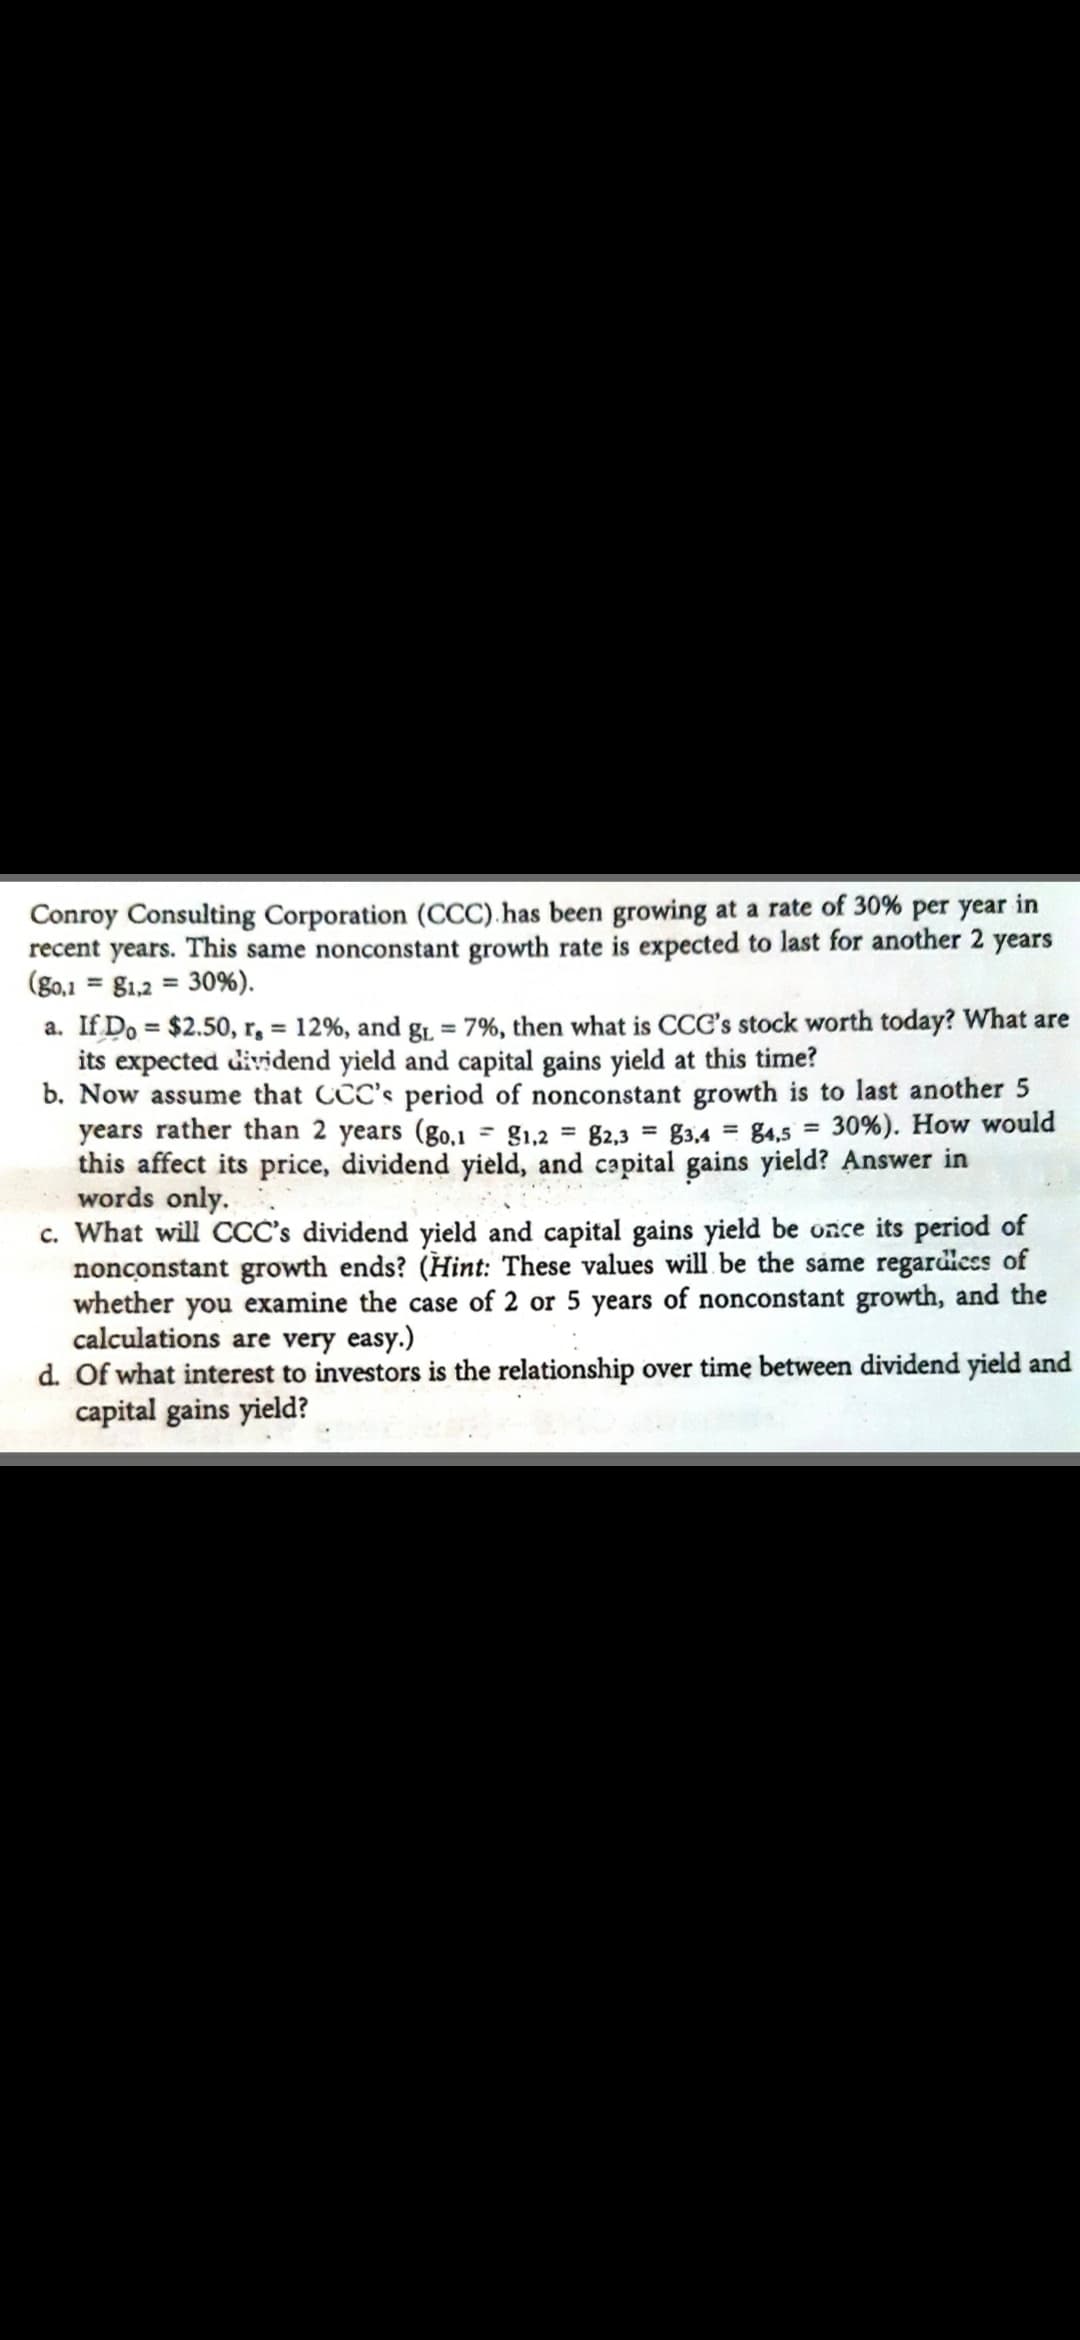 Conroy Consulting Corporation (CCC).has been growing at a rate of 30% per year in
recent years. This same nonconstant growth rate is expected to last for another 2 years
(g0,1 = g1,2 = 30%).
a. If Do = $2.50, r, = 12%, and g1, = 7%, then what is CCC's stock worth today? What are
its expected dividend yield and capital gains yield at this time?
b. Now assume that CCC's period of nonconstant growth is to last another 5
years rather than 2 years (go,1
this affect its price, dividend yield, and capital gains yield? Answer in
words only.
c. What will CCC's dividend yield and capital gains yield be once its period of
nonconstant growth ends? (Hint: These values will be the same regardicss of
whether you examine the case of 2 or 5 years of nonconstant growth, and the
calculations are very easy.)
d. Of what interest to investors is the relationship over time between dividend yield and
capital gains yield?
%3D
g1,2 = 82,3 = g3,4 = 84,5 = 30%). How would
